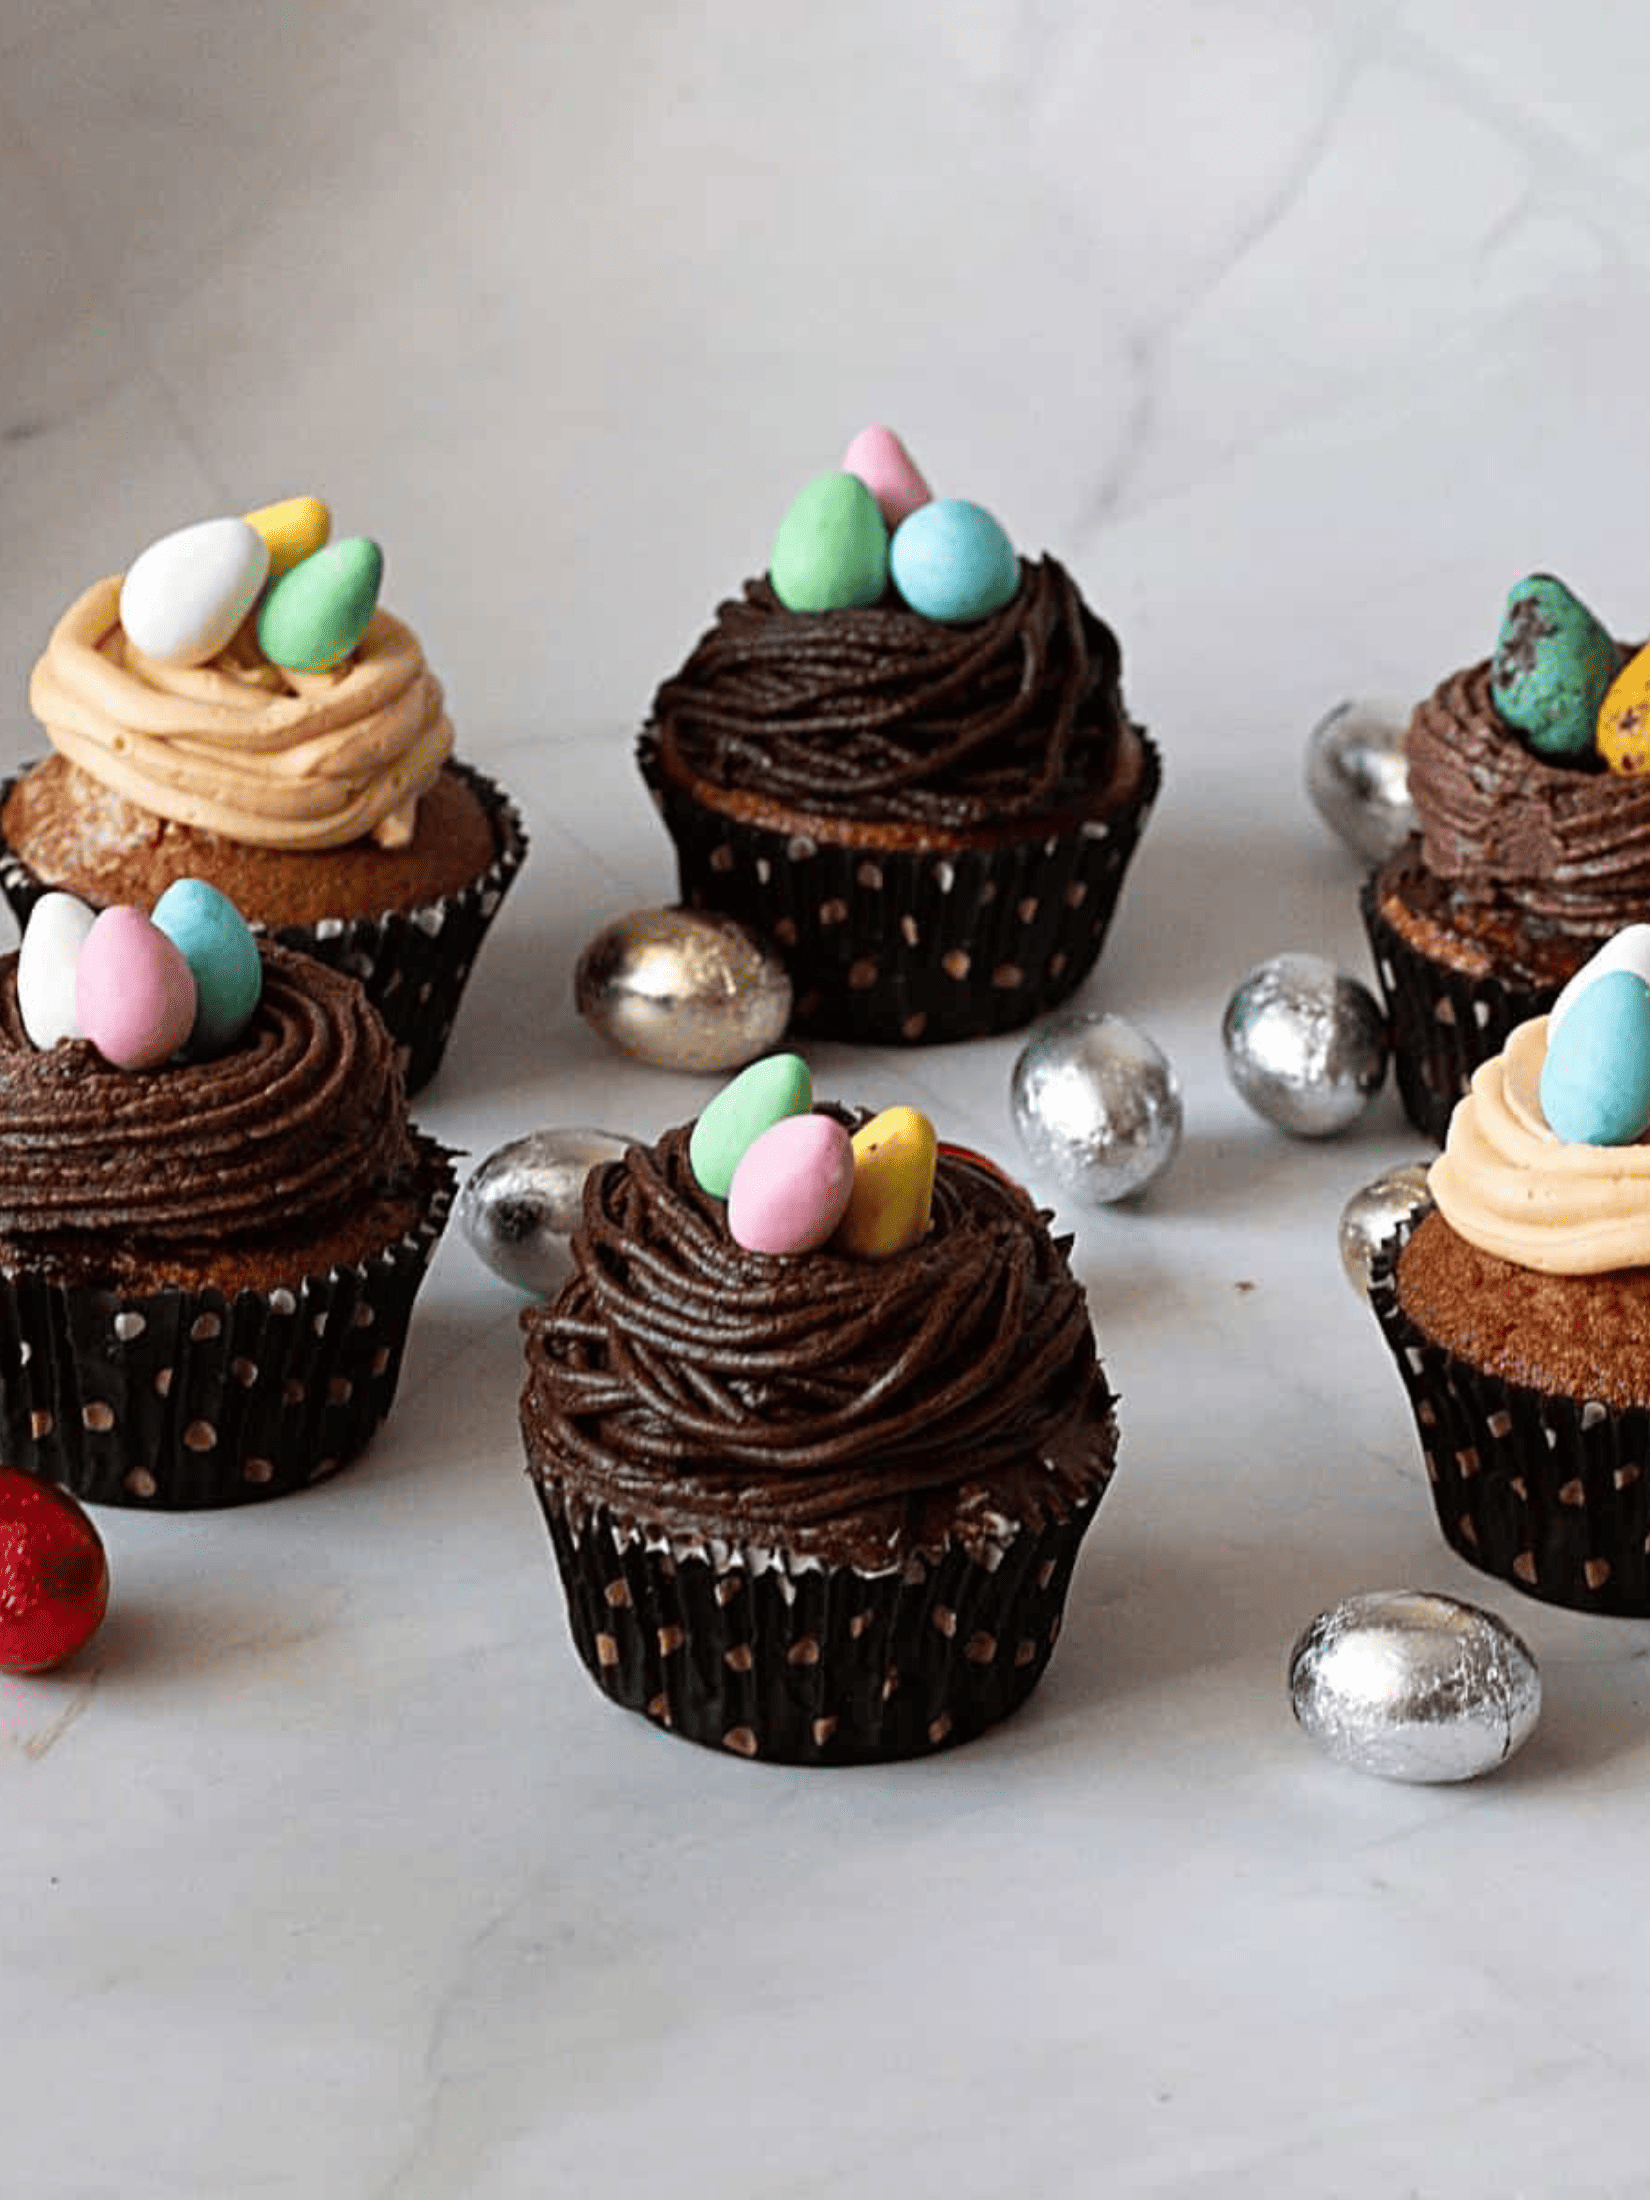 delicious Easter chocolate bird's nest cupcakes topped with colorful candy eggs.